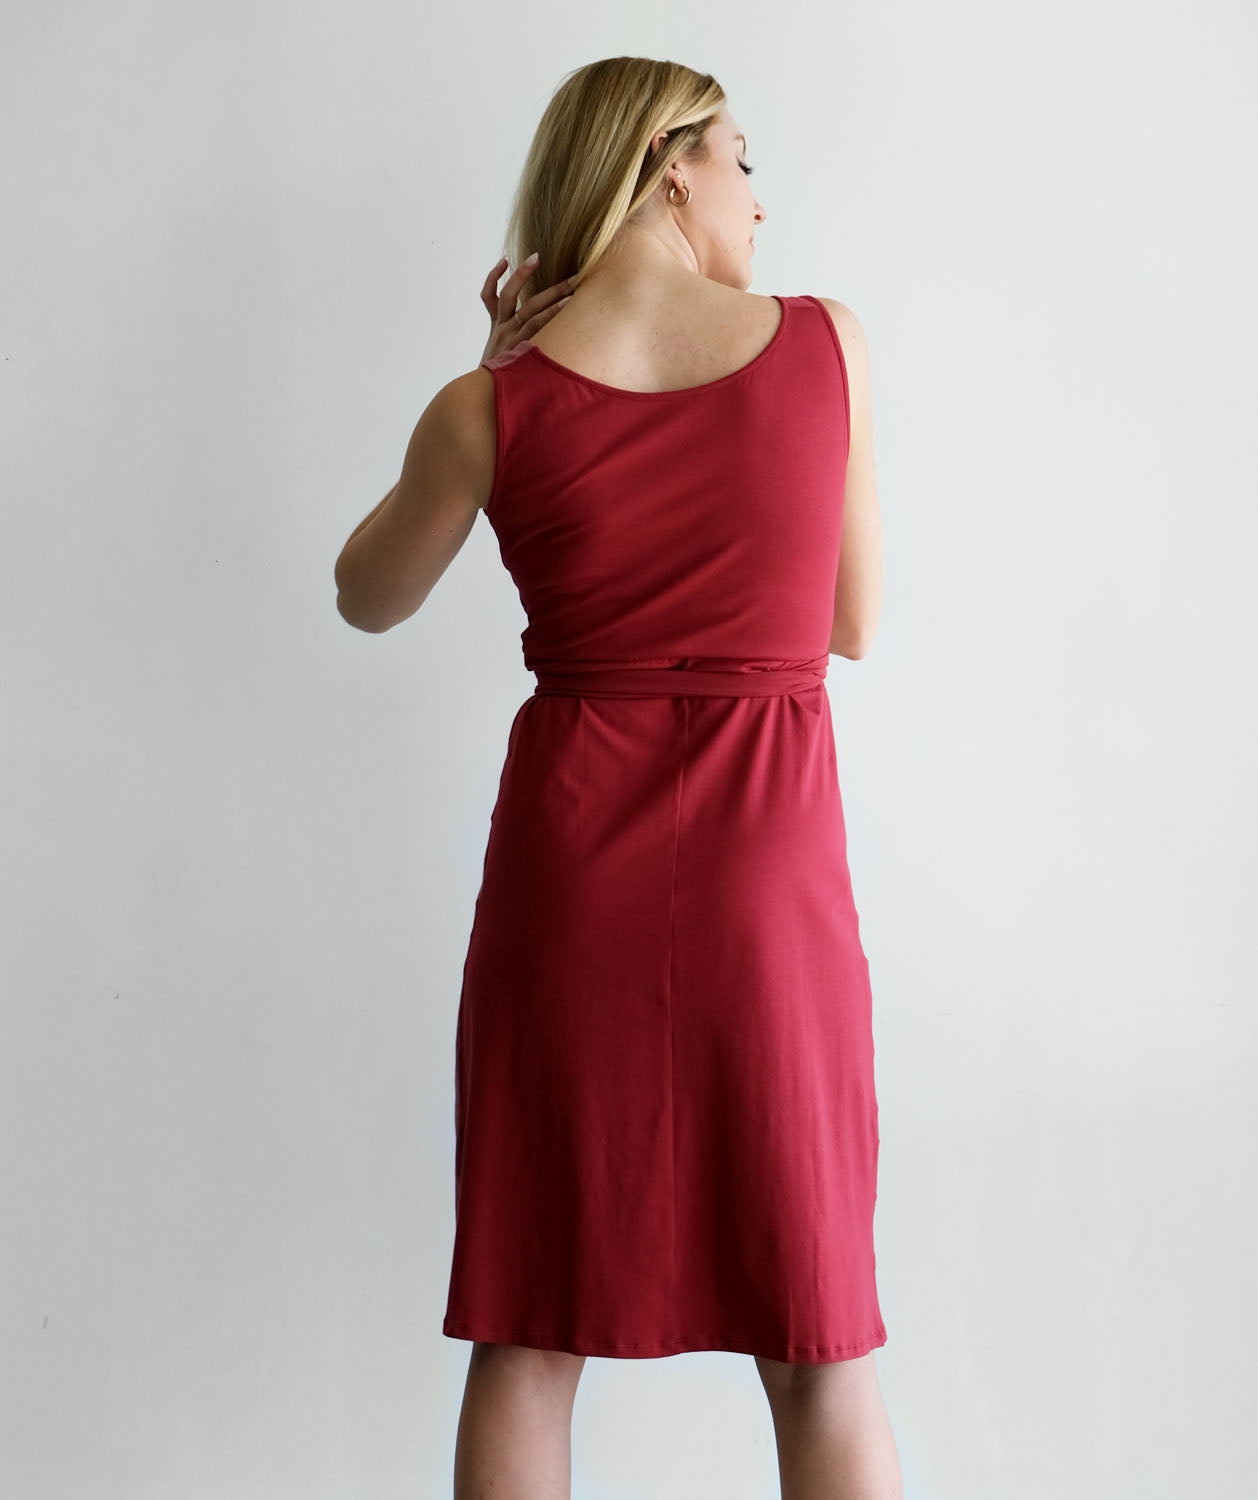 POPPY colorblock dress in Red/Pink